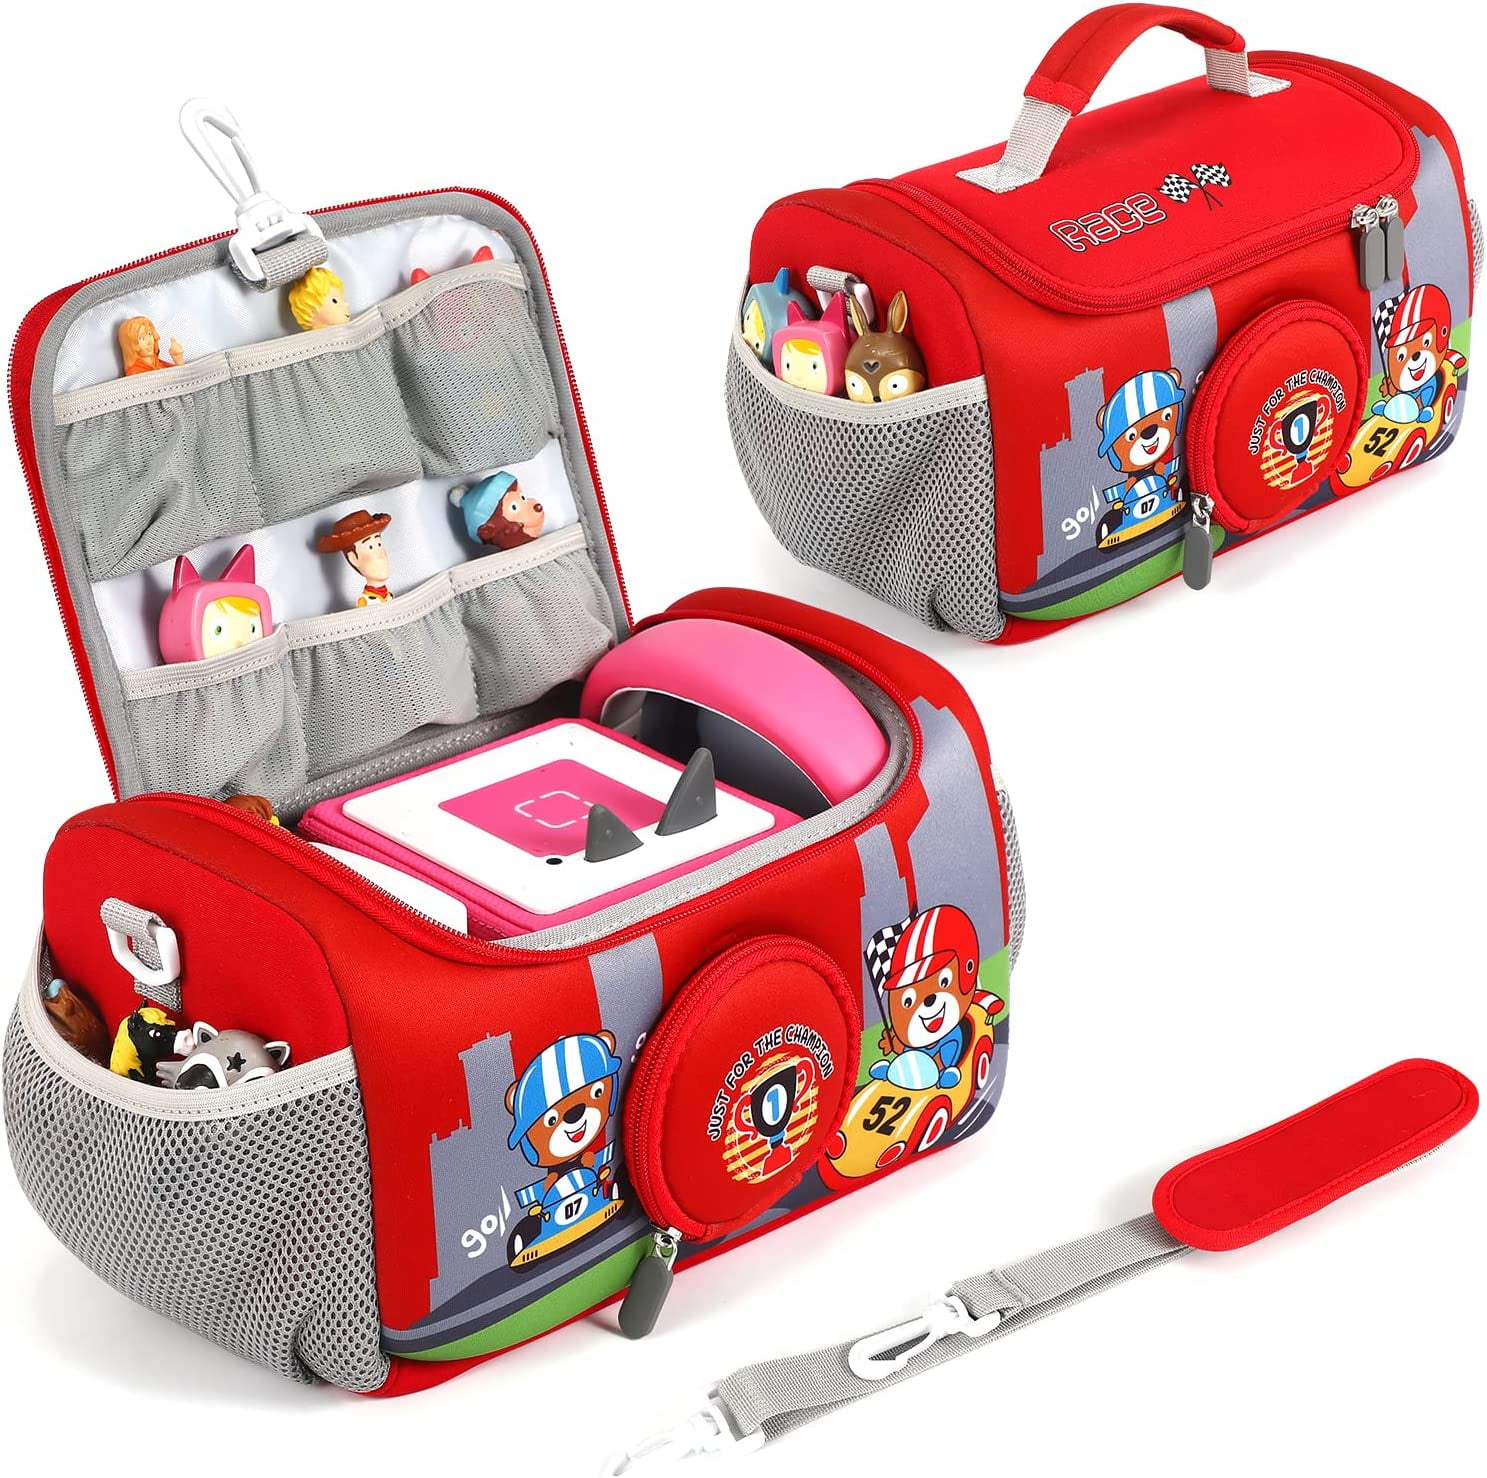 Carrying Case for Toniebox Starter Set Storage Carrier Bag for Toniesbox  Audio Player Carrying Box for Kids Toniebox Accessories Travel Carrying Bag  for Toniebox Red 